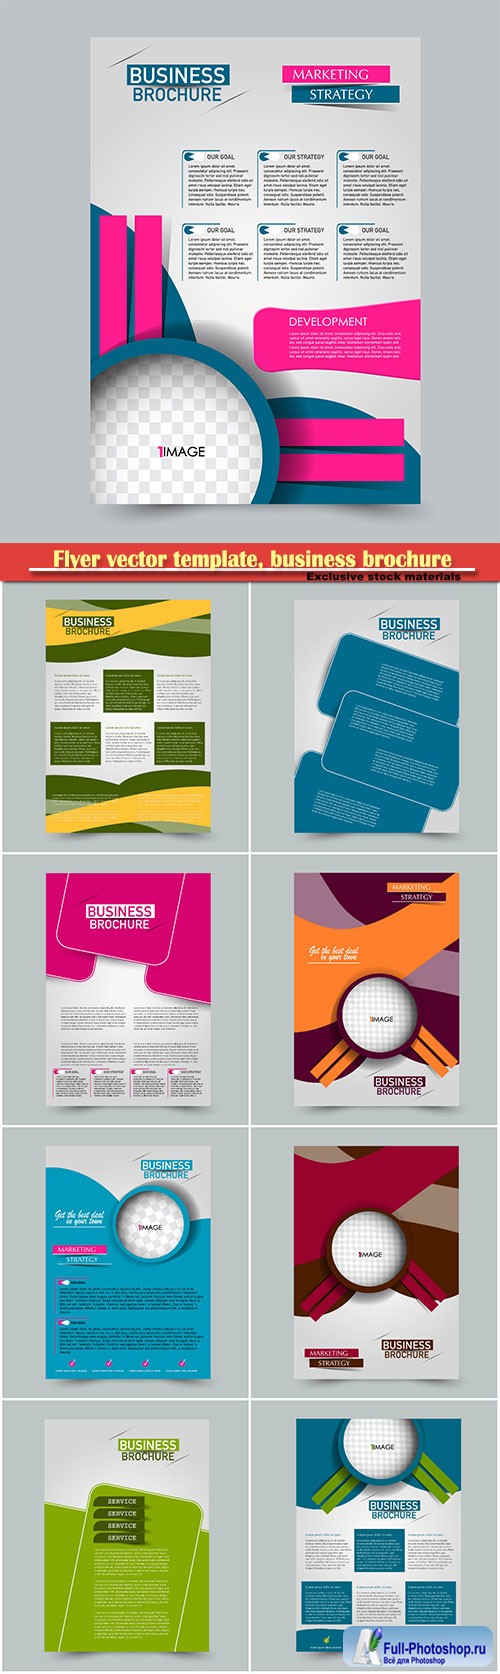 Flyer vector template, business brochure, magazine cover # 6